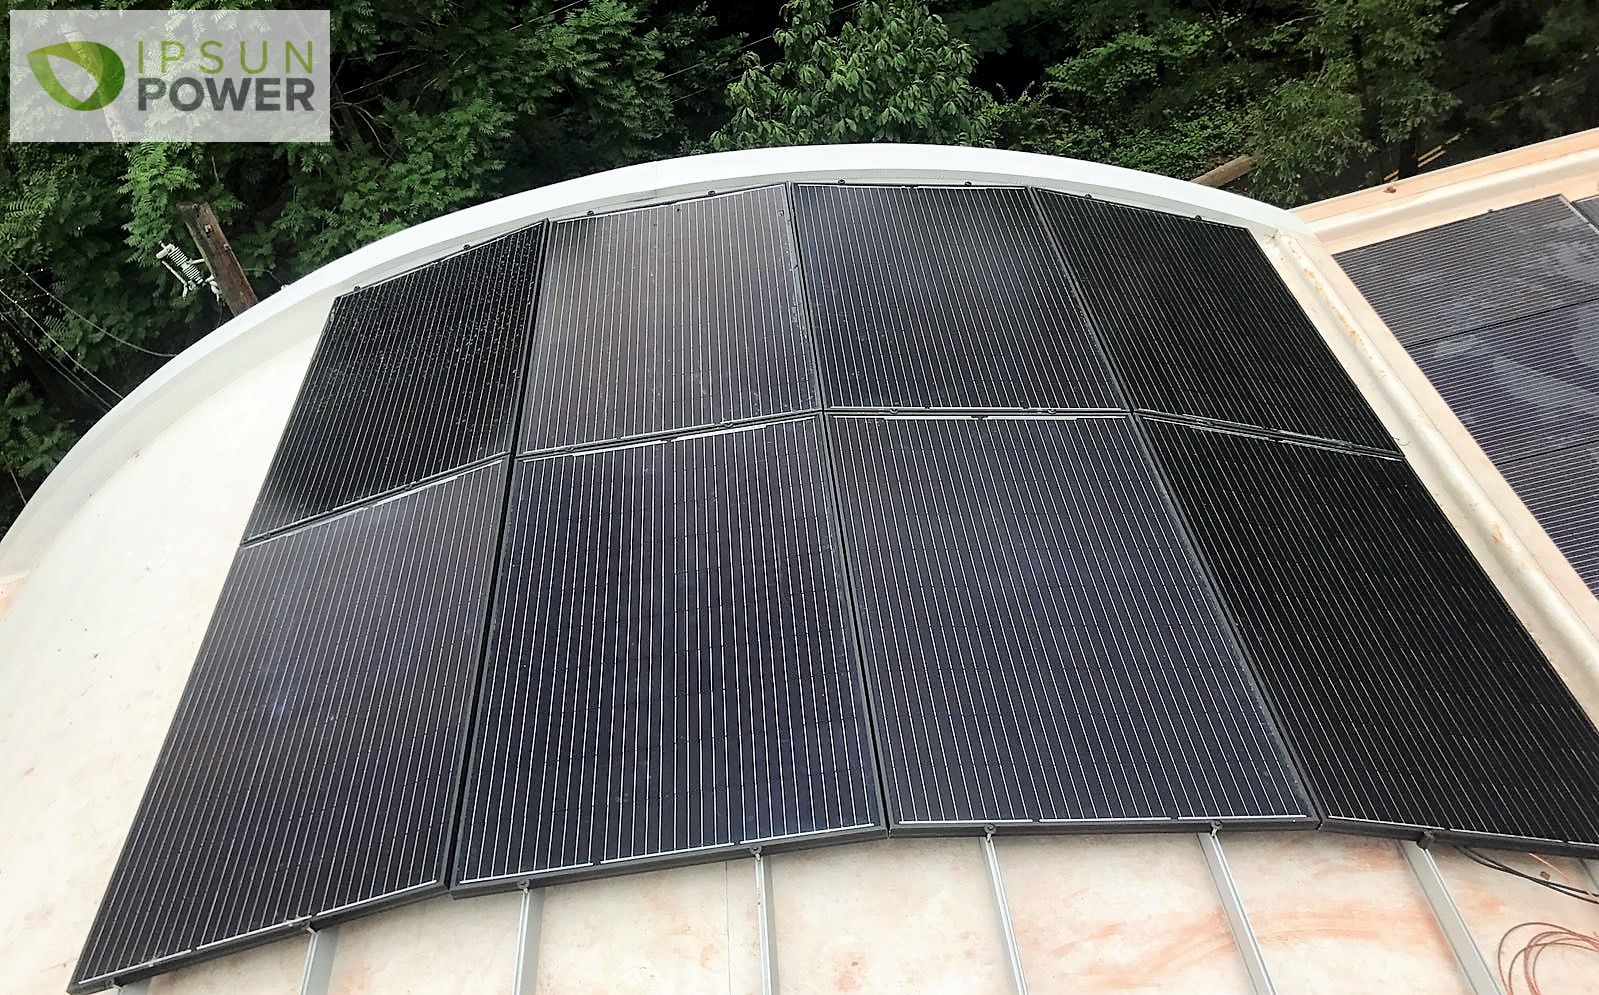 Solar panels on a curved roof